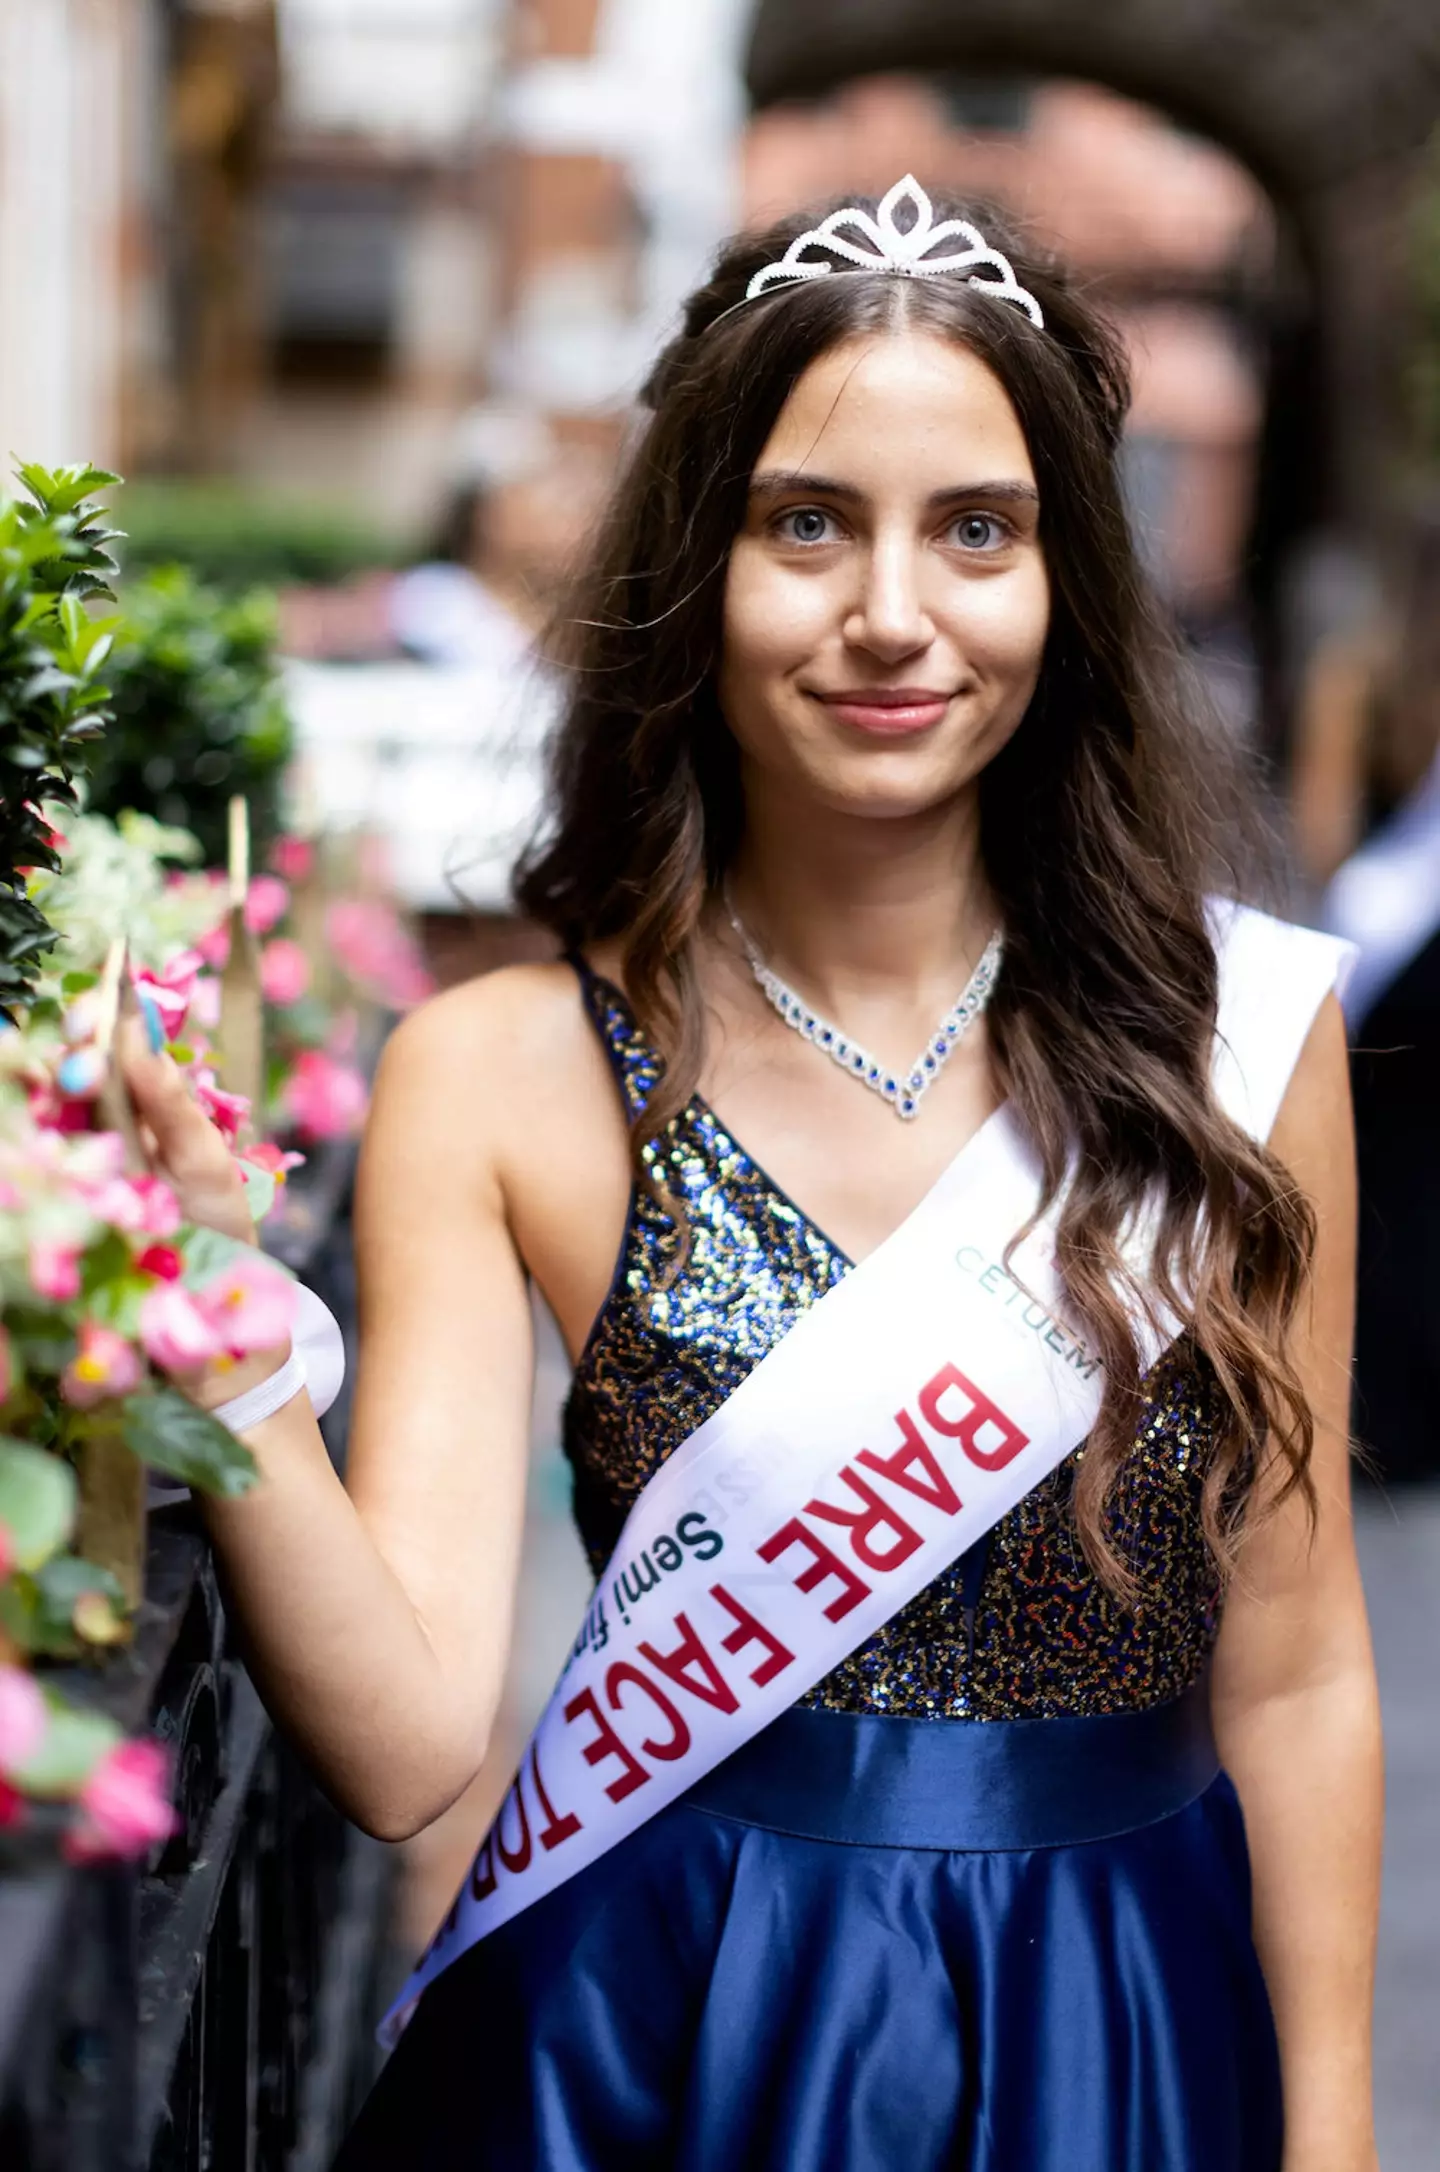 Melisa Raouf is breaking beauty pageant stereotypes.